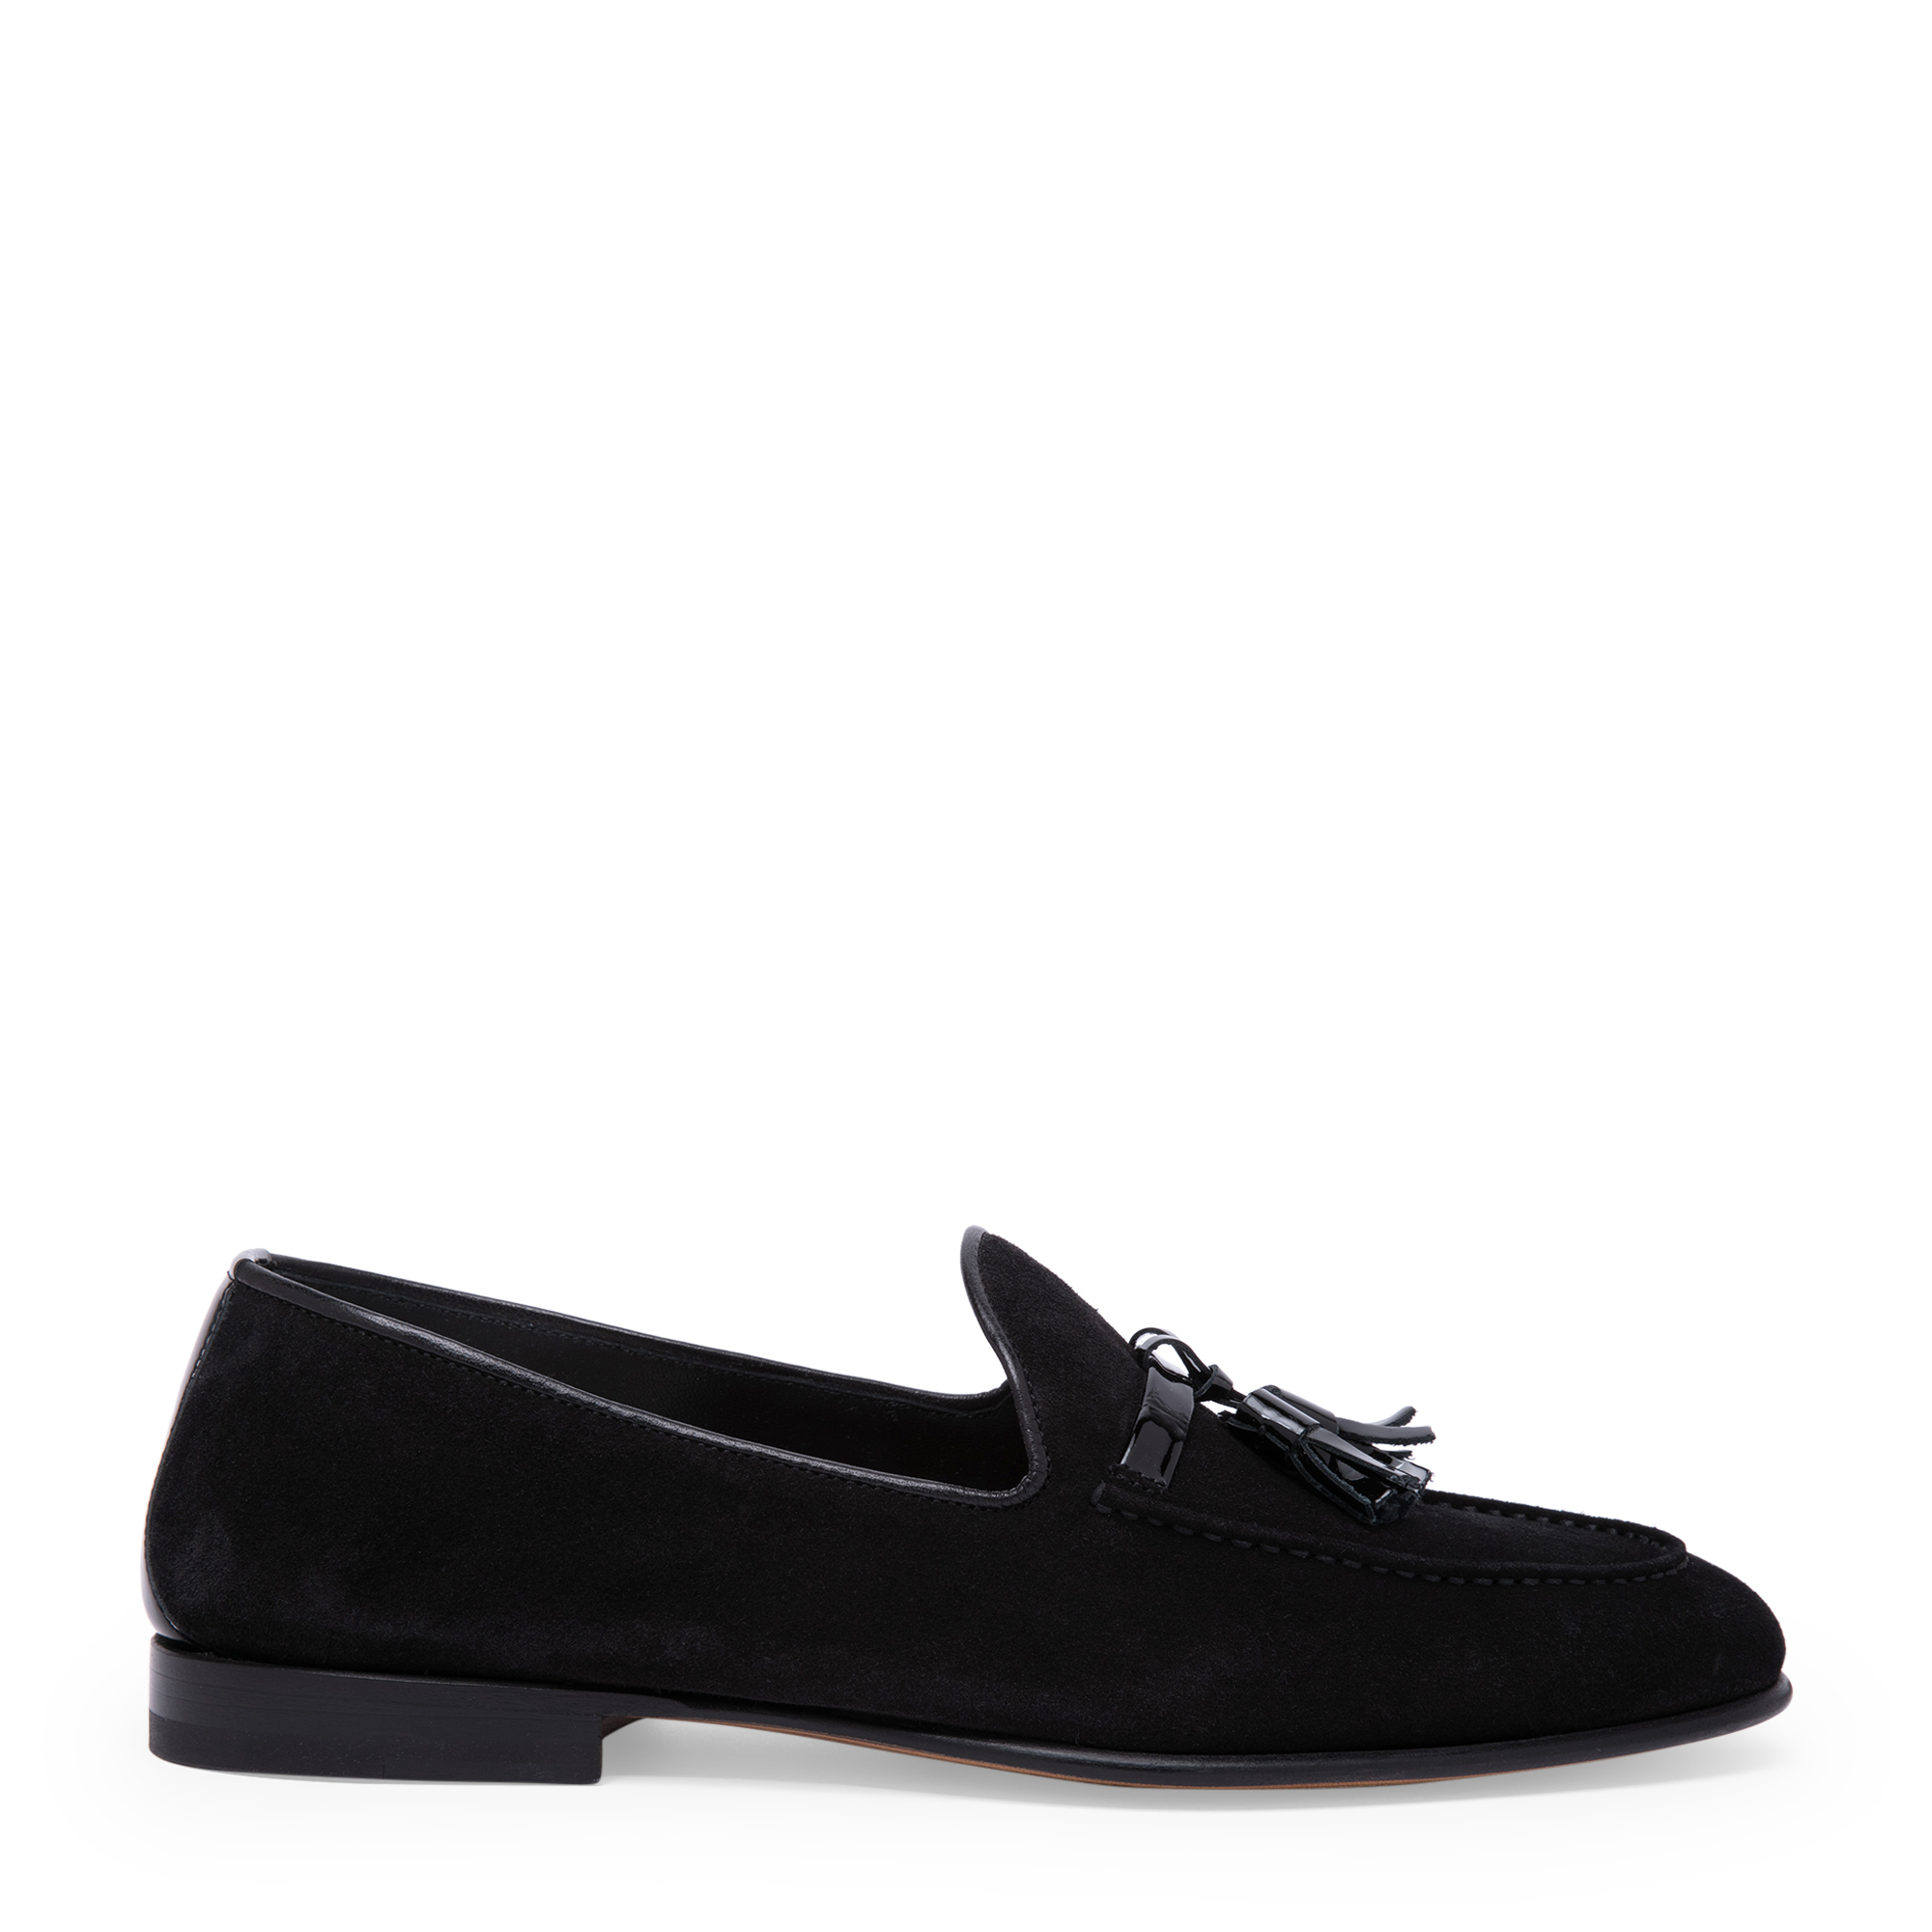 Alberto loafers